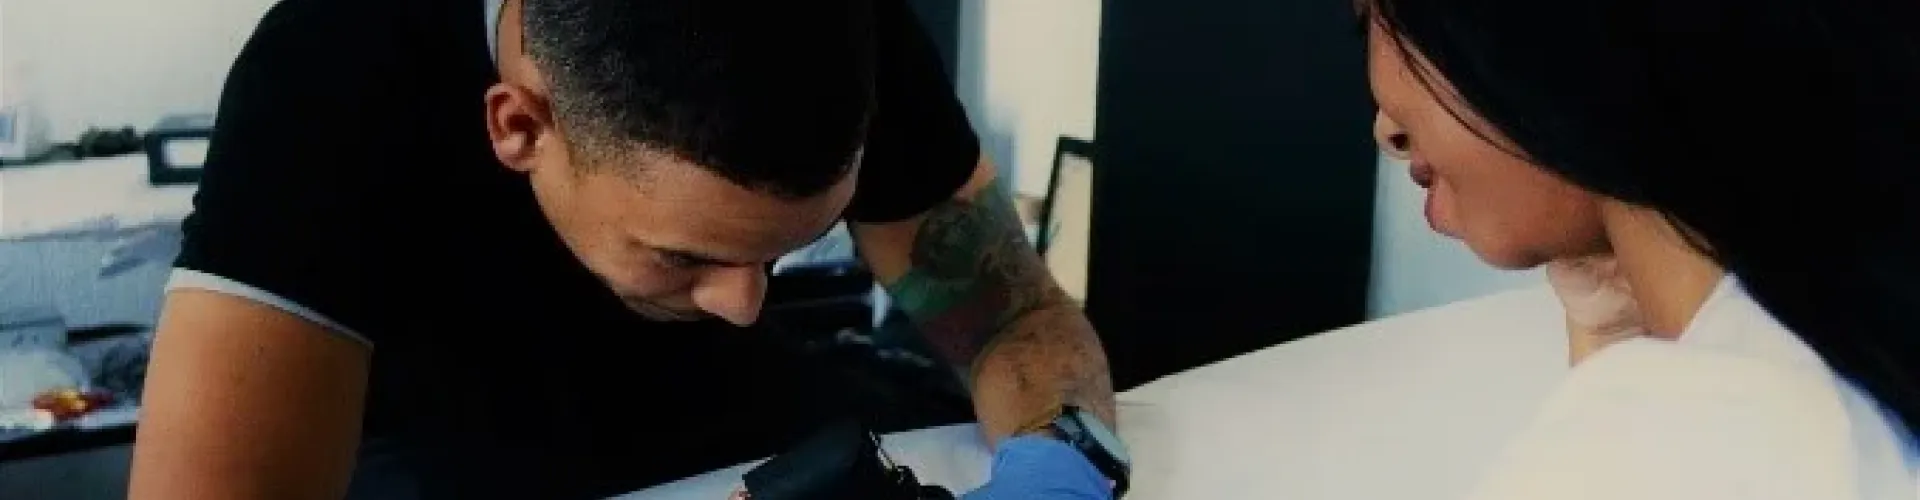 A person giving someone a tattoo